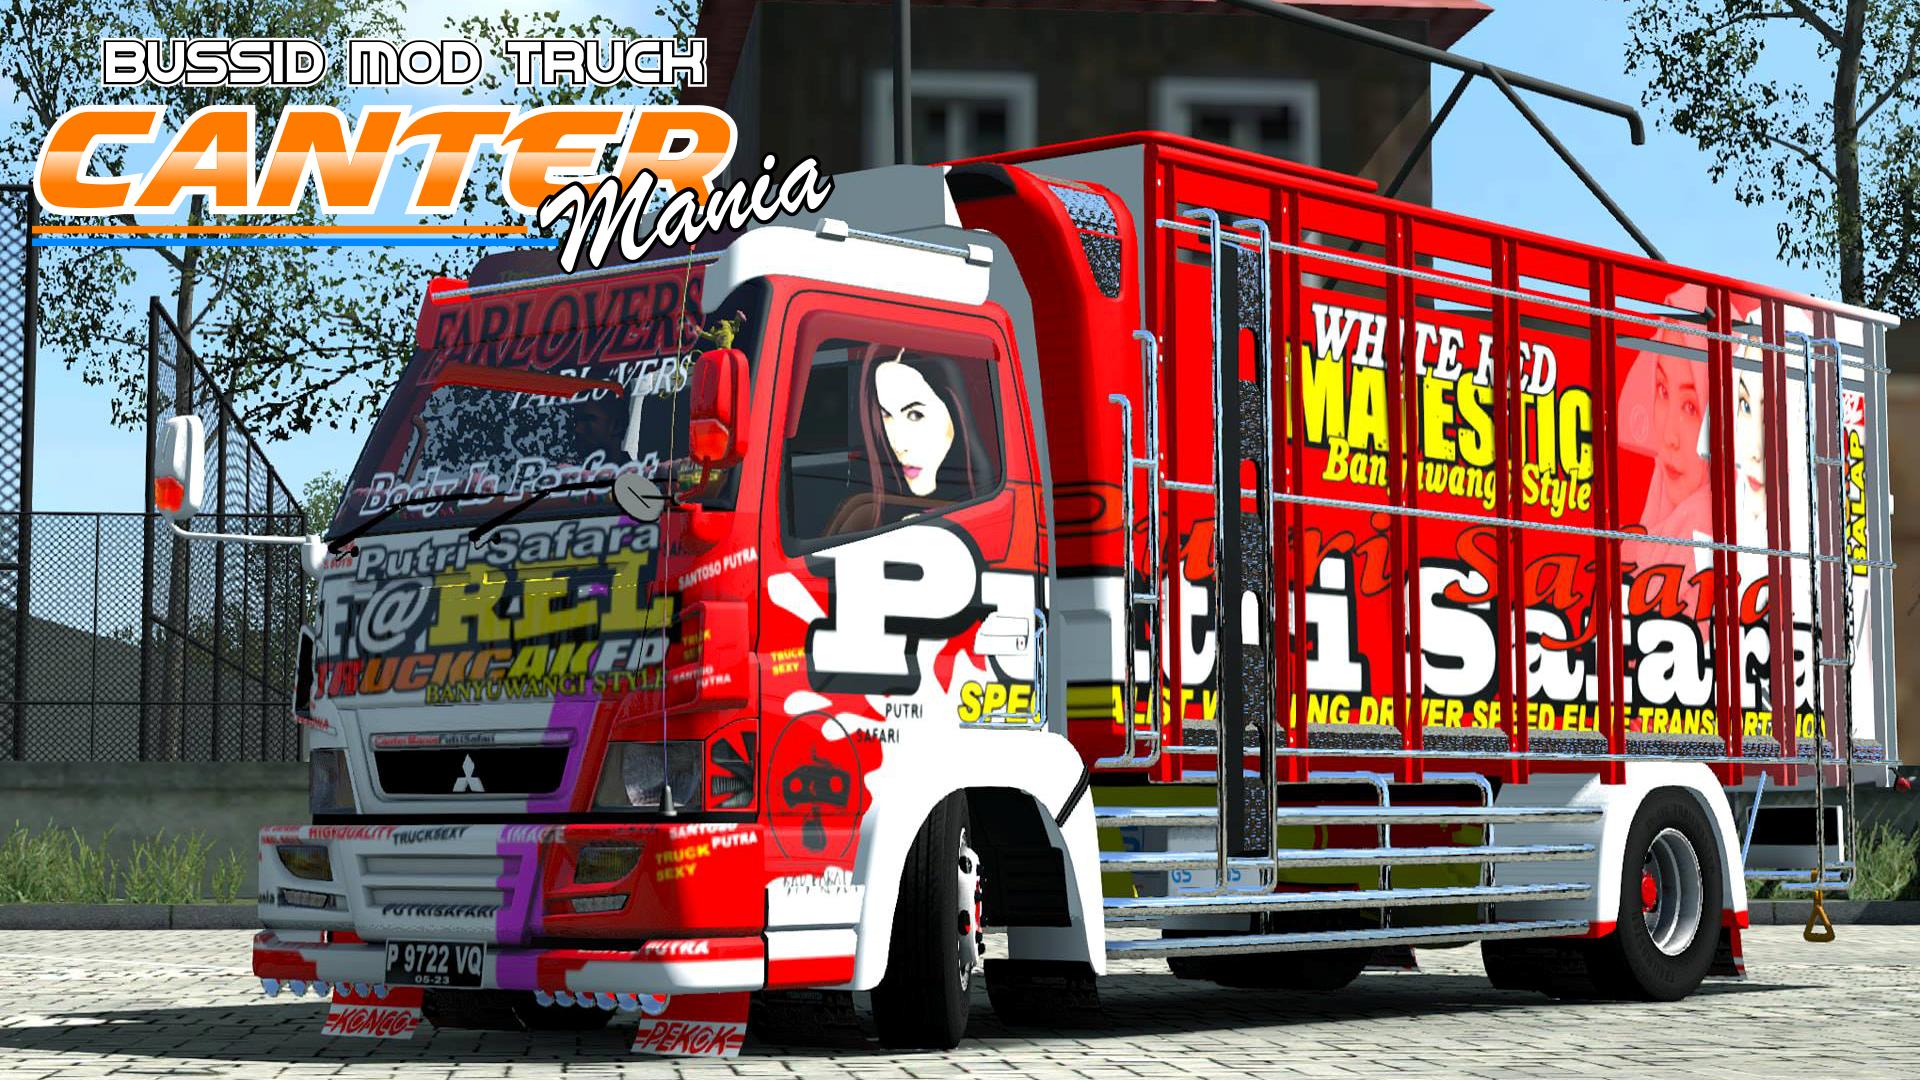 Download Mod Bussid Truck Canter & Livery Indonesia